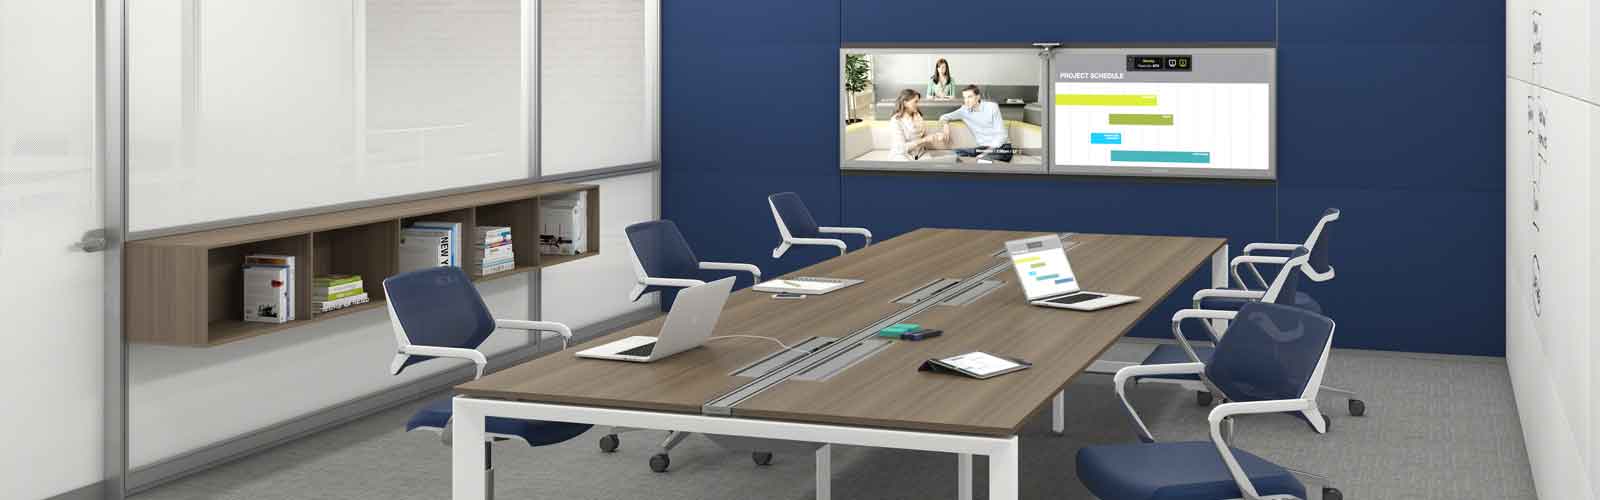 Media:scape by steelcase bringing furniture and technology together